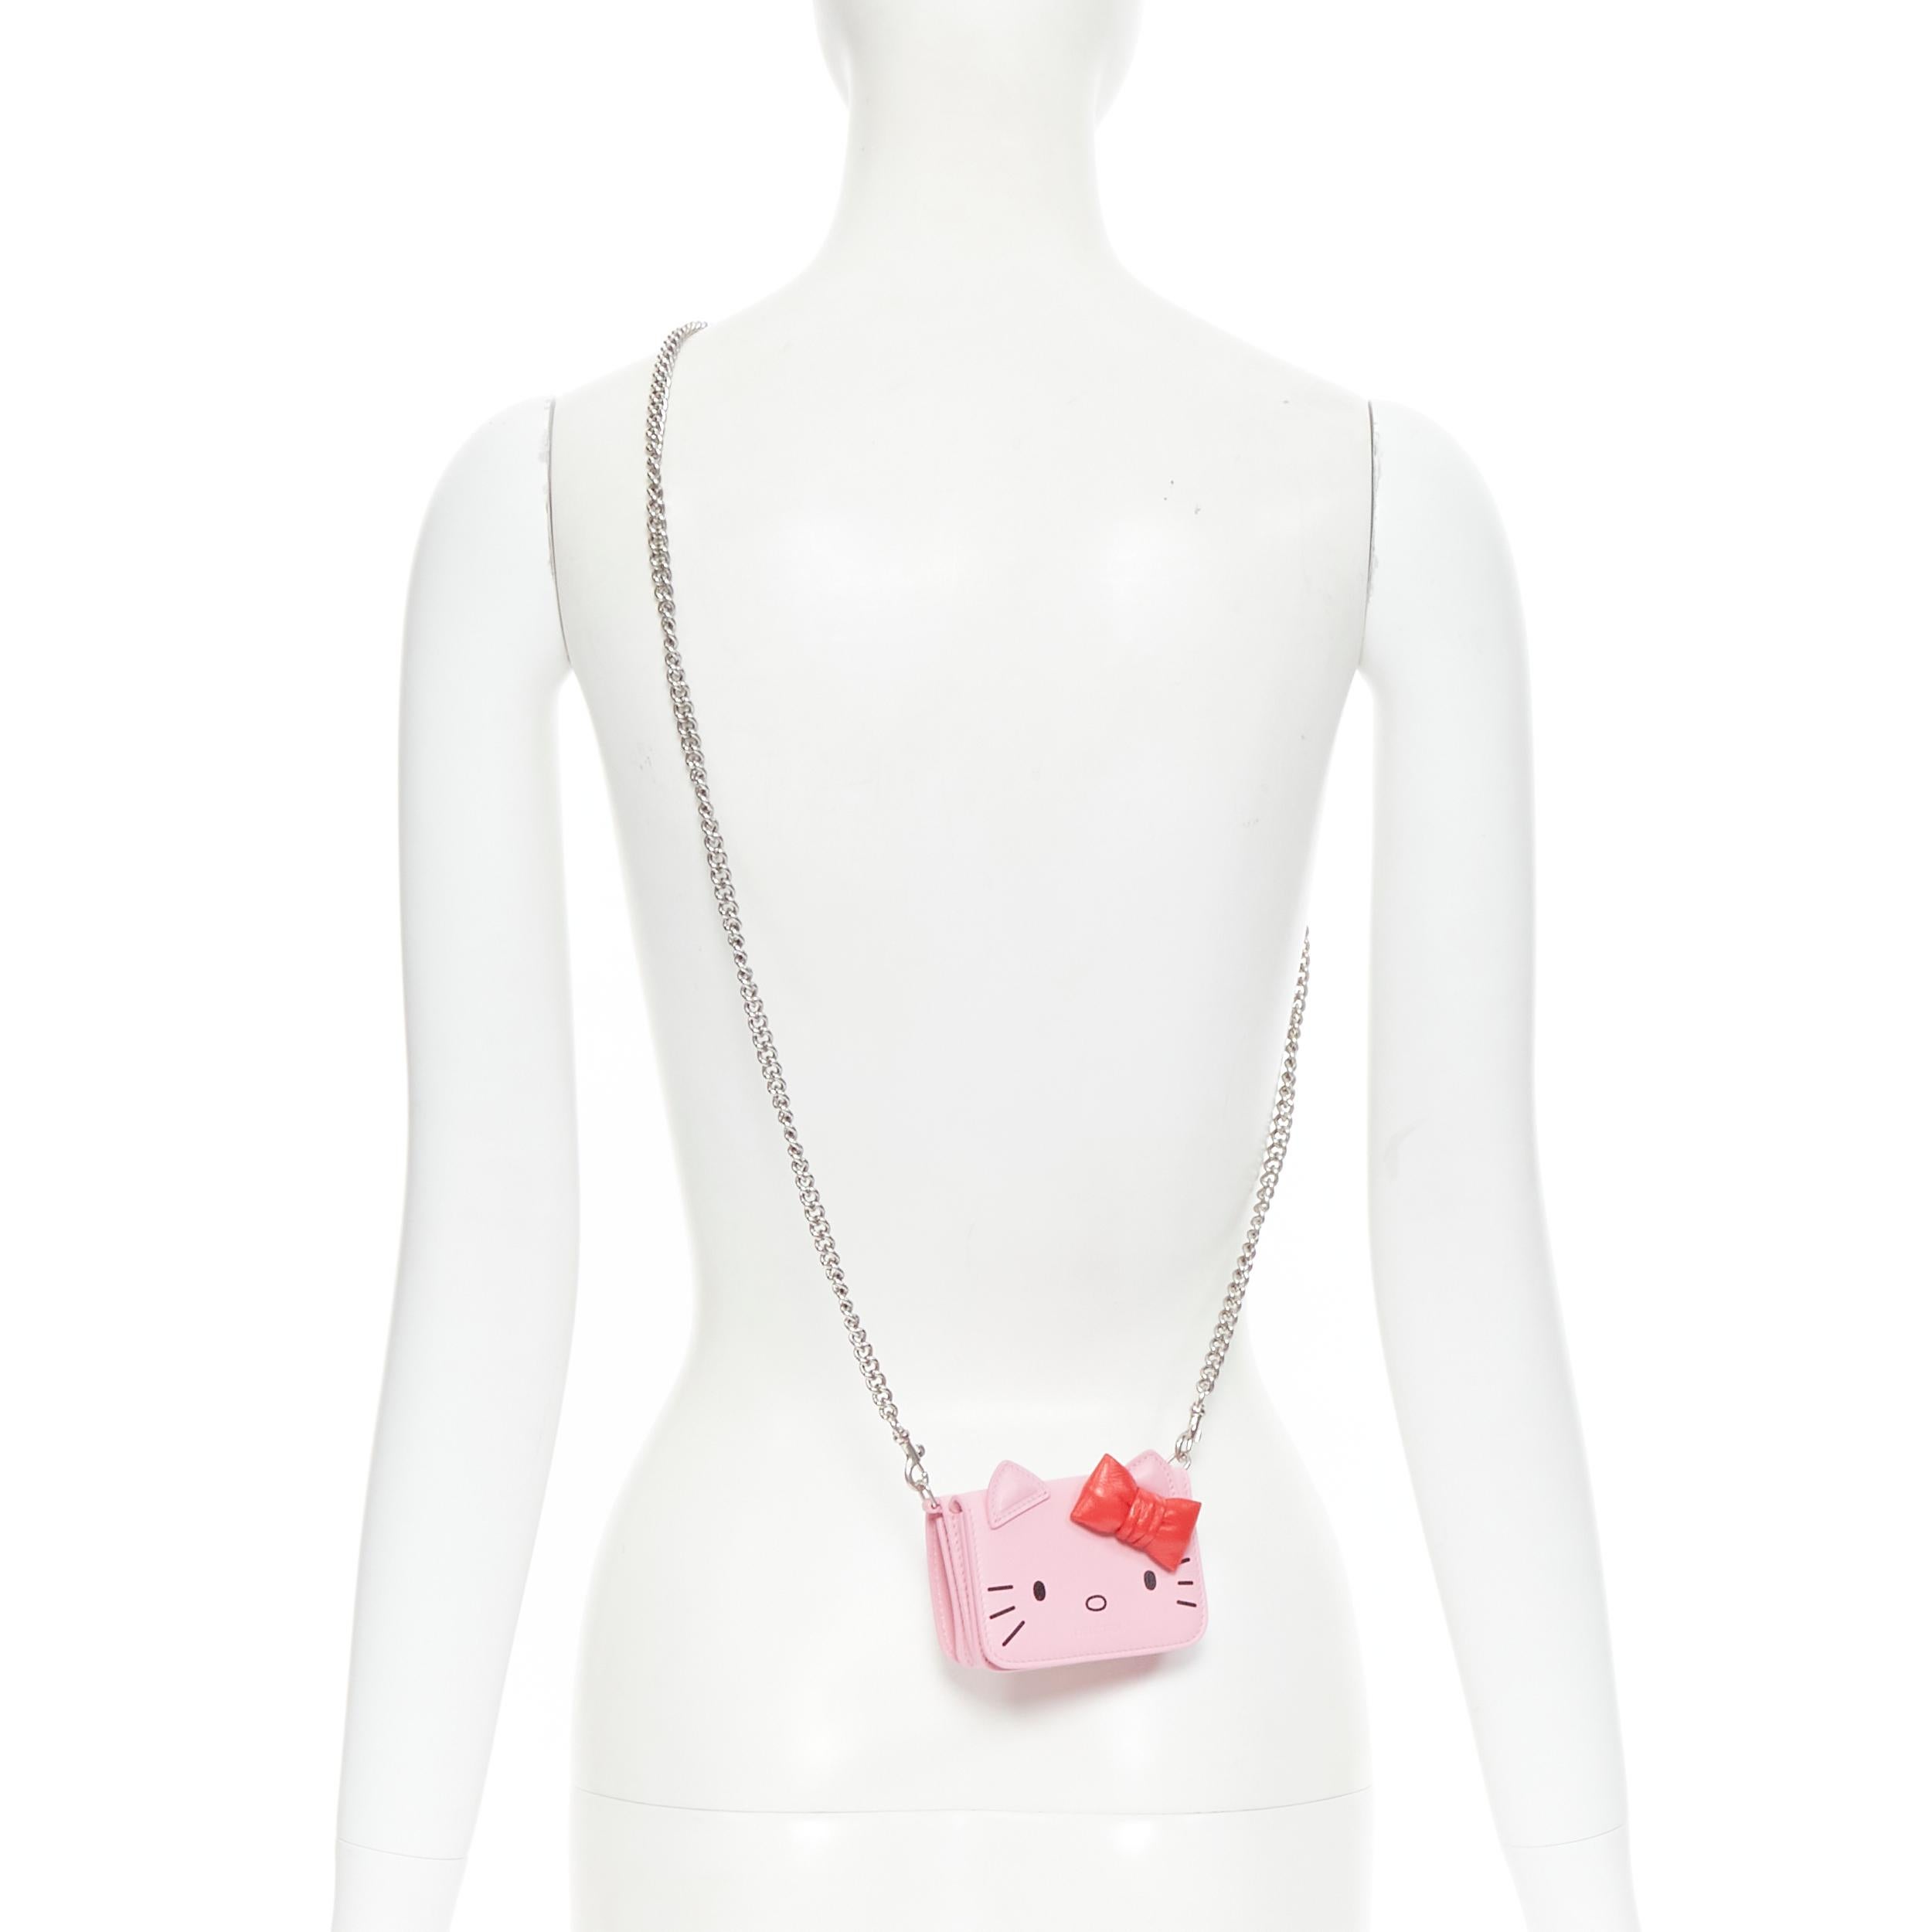 new BALENCIAGA Kitty pink red ribbon wallet micro silver chain crossbody bag 
Reference: TGAS/B01549
Brand: Balenciaga
Designer: Demna Gvasalia
Model: Kitty wallet on chain
Material: Leather
Color: Pink
Pattern: Solid
Closure: Button
Extra Detail: